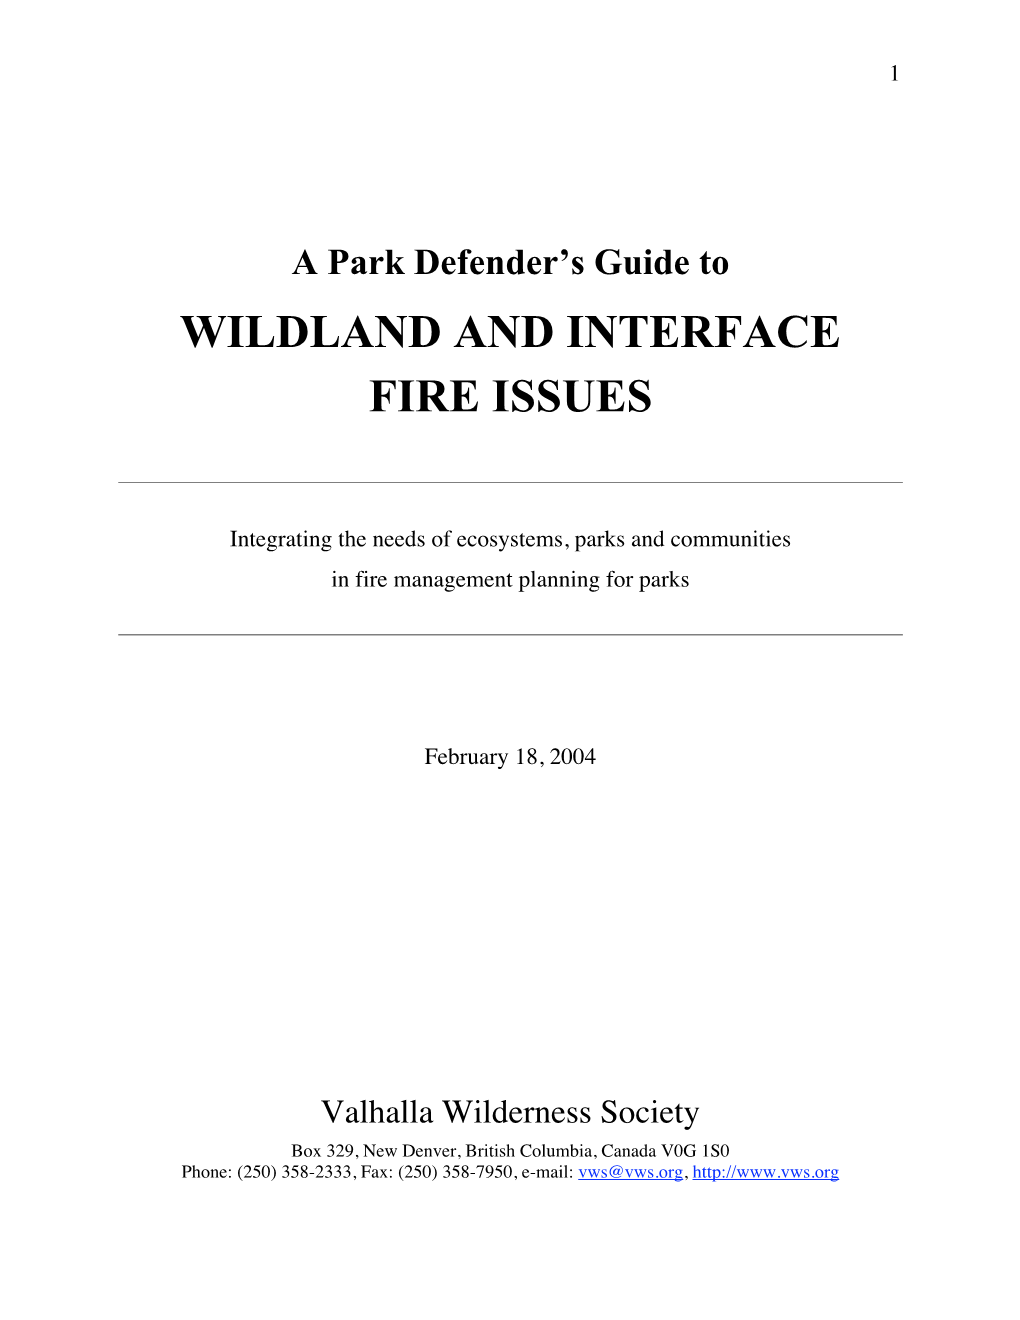 A Park Defenders Guide to Wildland and Interface Fire Issues 2004 Feb14